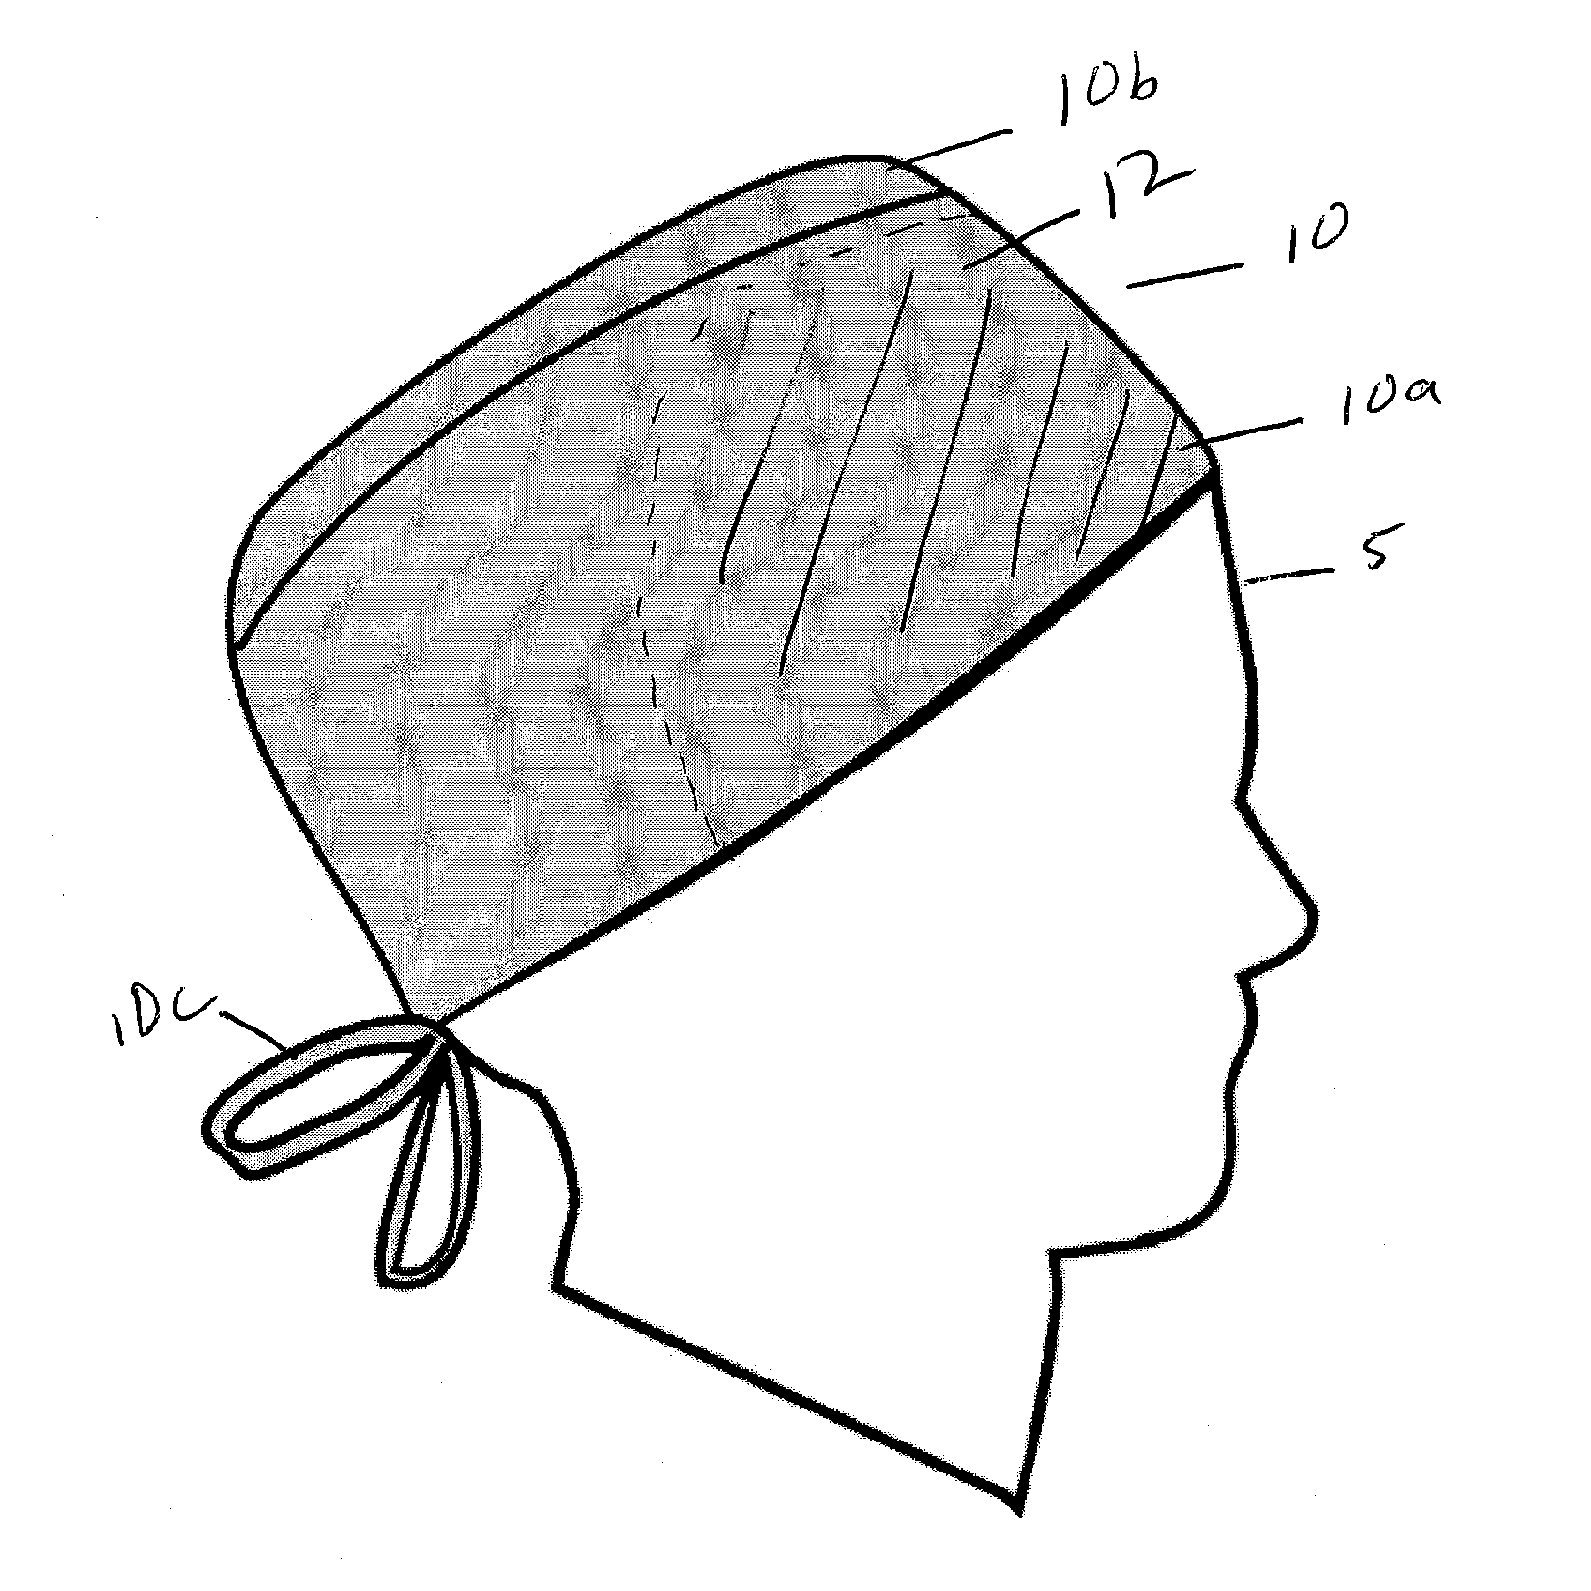 Particle radiation shielding head cover